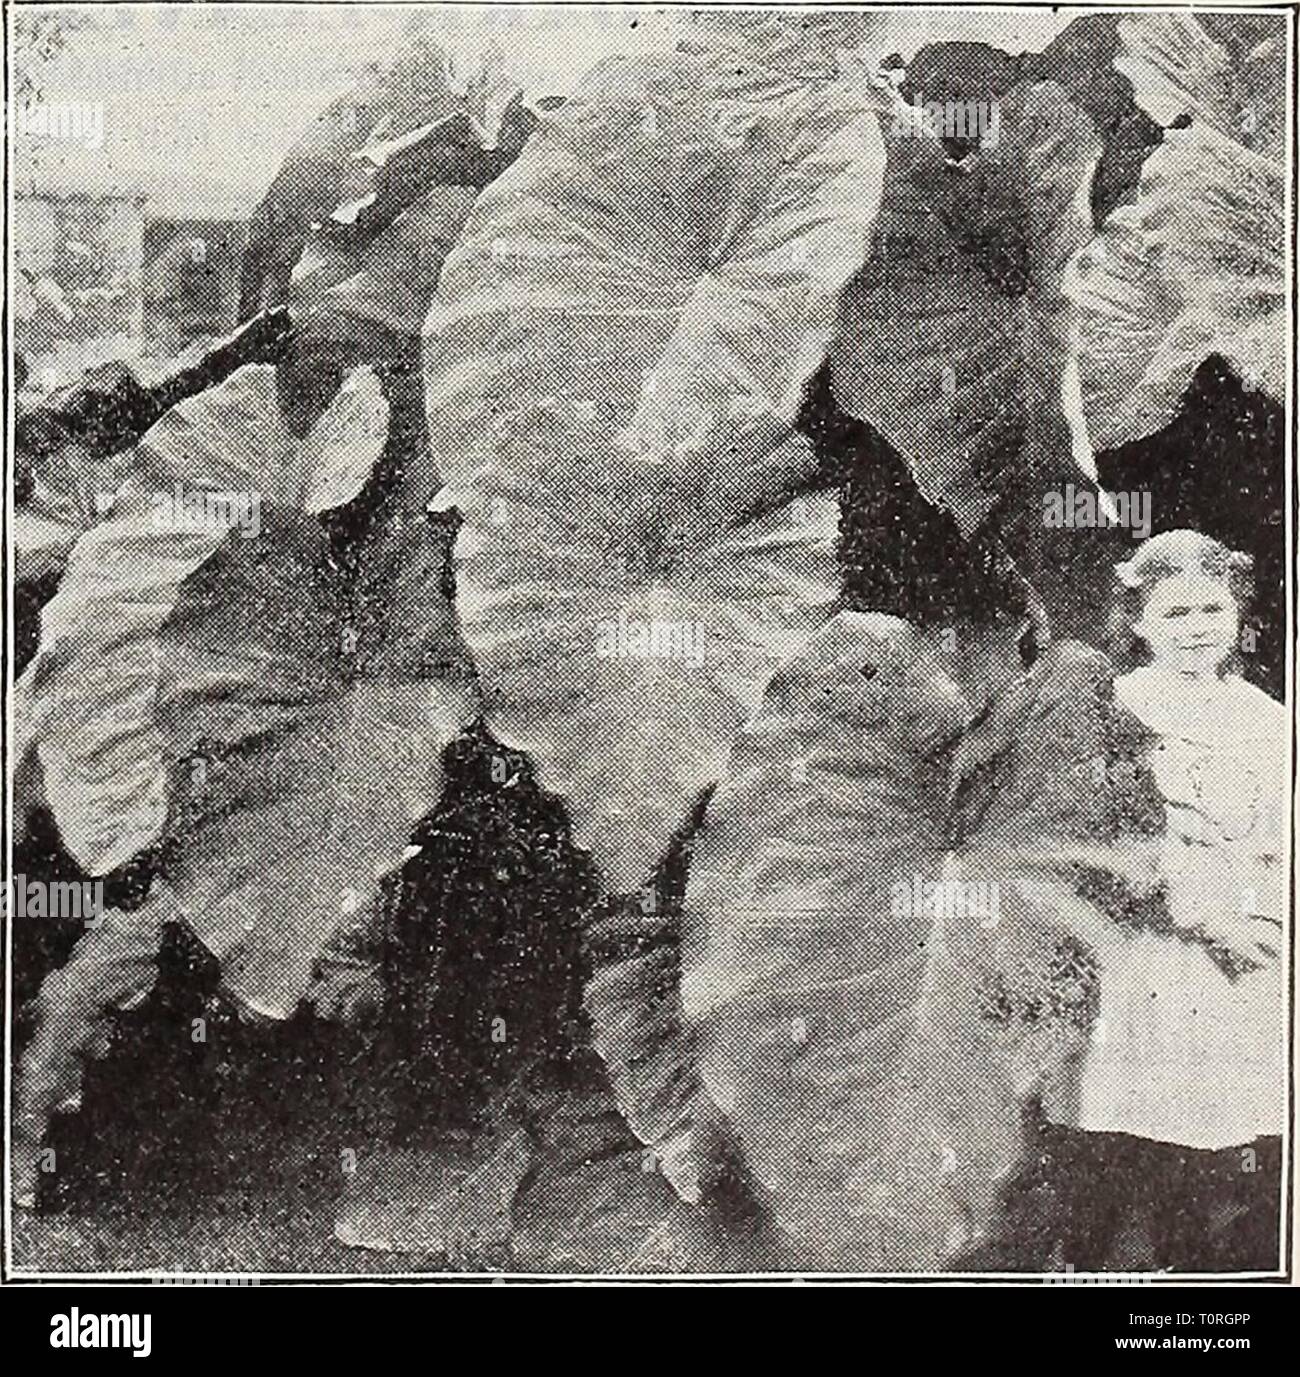 Dreer's 1909 garden book (1909) Dreer's 1909 garden book  dreers1909garden1909henr Year: 1909  New Fancy Caladiums. BEGONIA REX (Ornamental-leaved). Our collection embraces all the good old varieties as well as the best of recent introductions. 15 cts. each; $1.50 per doz. FIBROUS-ROOTED BEGONIAS. Alba Picta. Leaves glossy green, freely spotted with silvery- white; flowers white. Argentea Guttata. Foliage of rich green, spotted with silver. Corallina Lticerna. Gigantic trusses of bronzy-red flowers, in bloom continuously from April to November. ilaageana. Large flowers of a creamy white, suffu Stock Photo